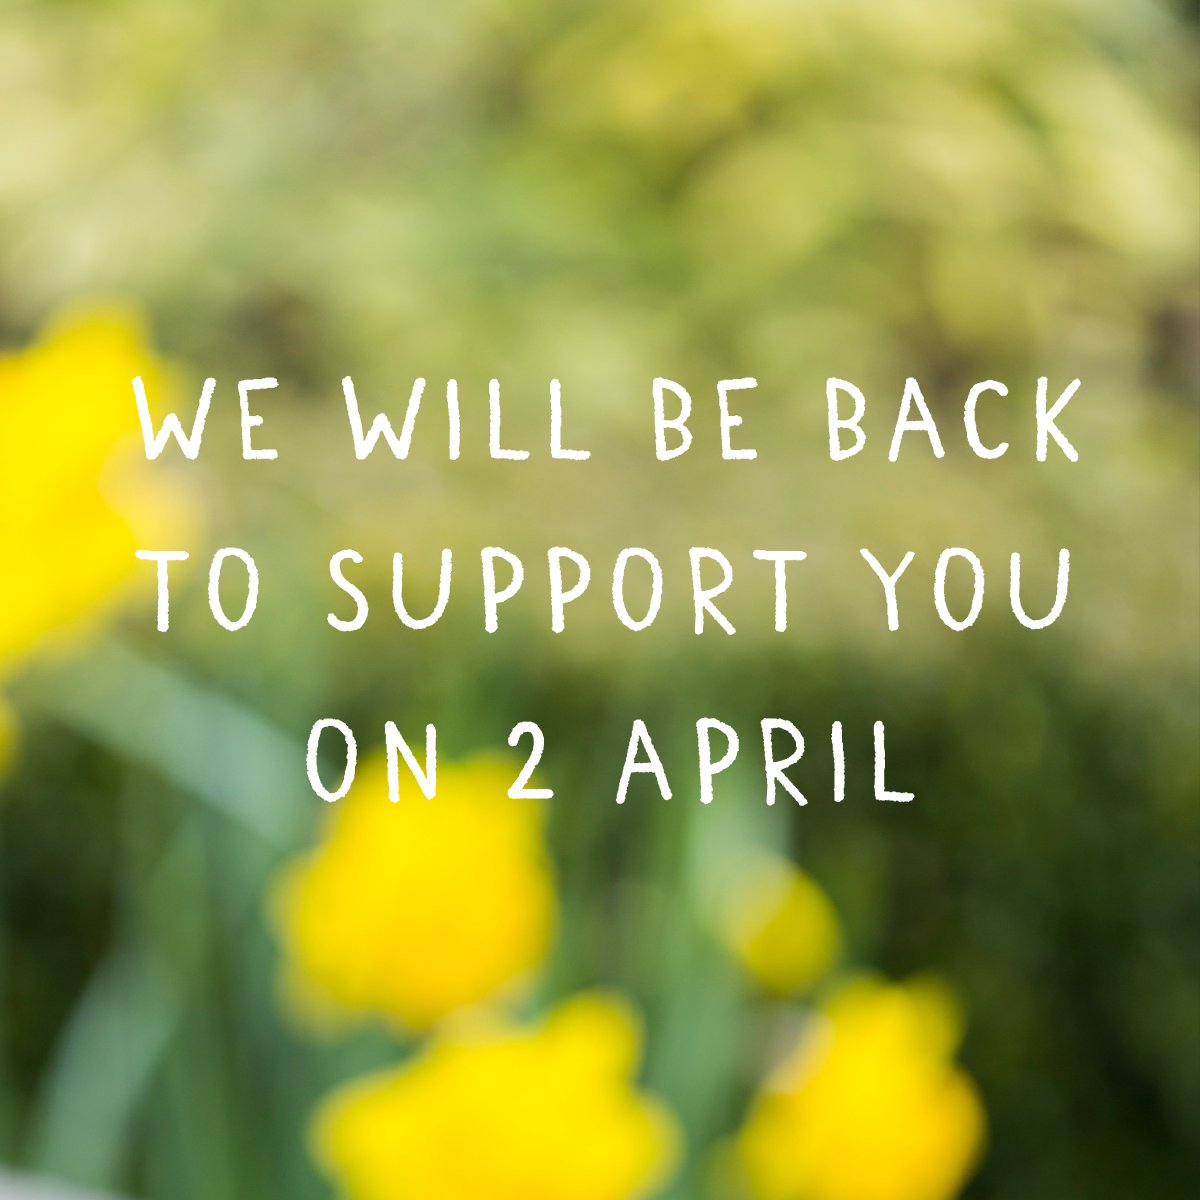 We'll be back to support you on 2 April. If you're looking for information during the bank holiday weekend, please visit our website which has lots of useful pages about living well with cancer. maggies.org/our-centres/ma…